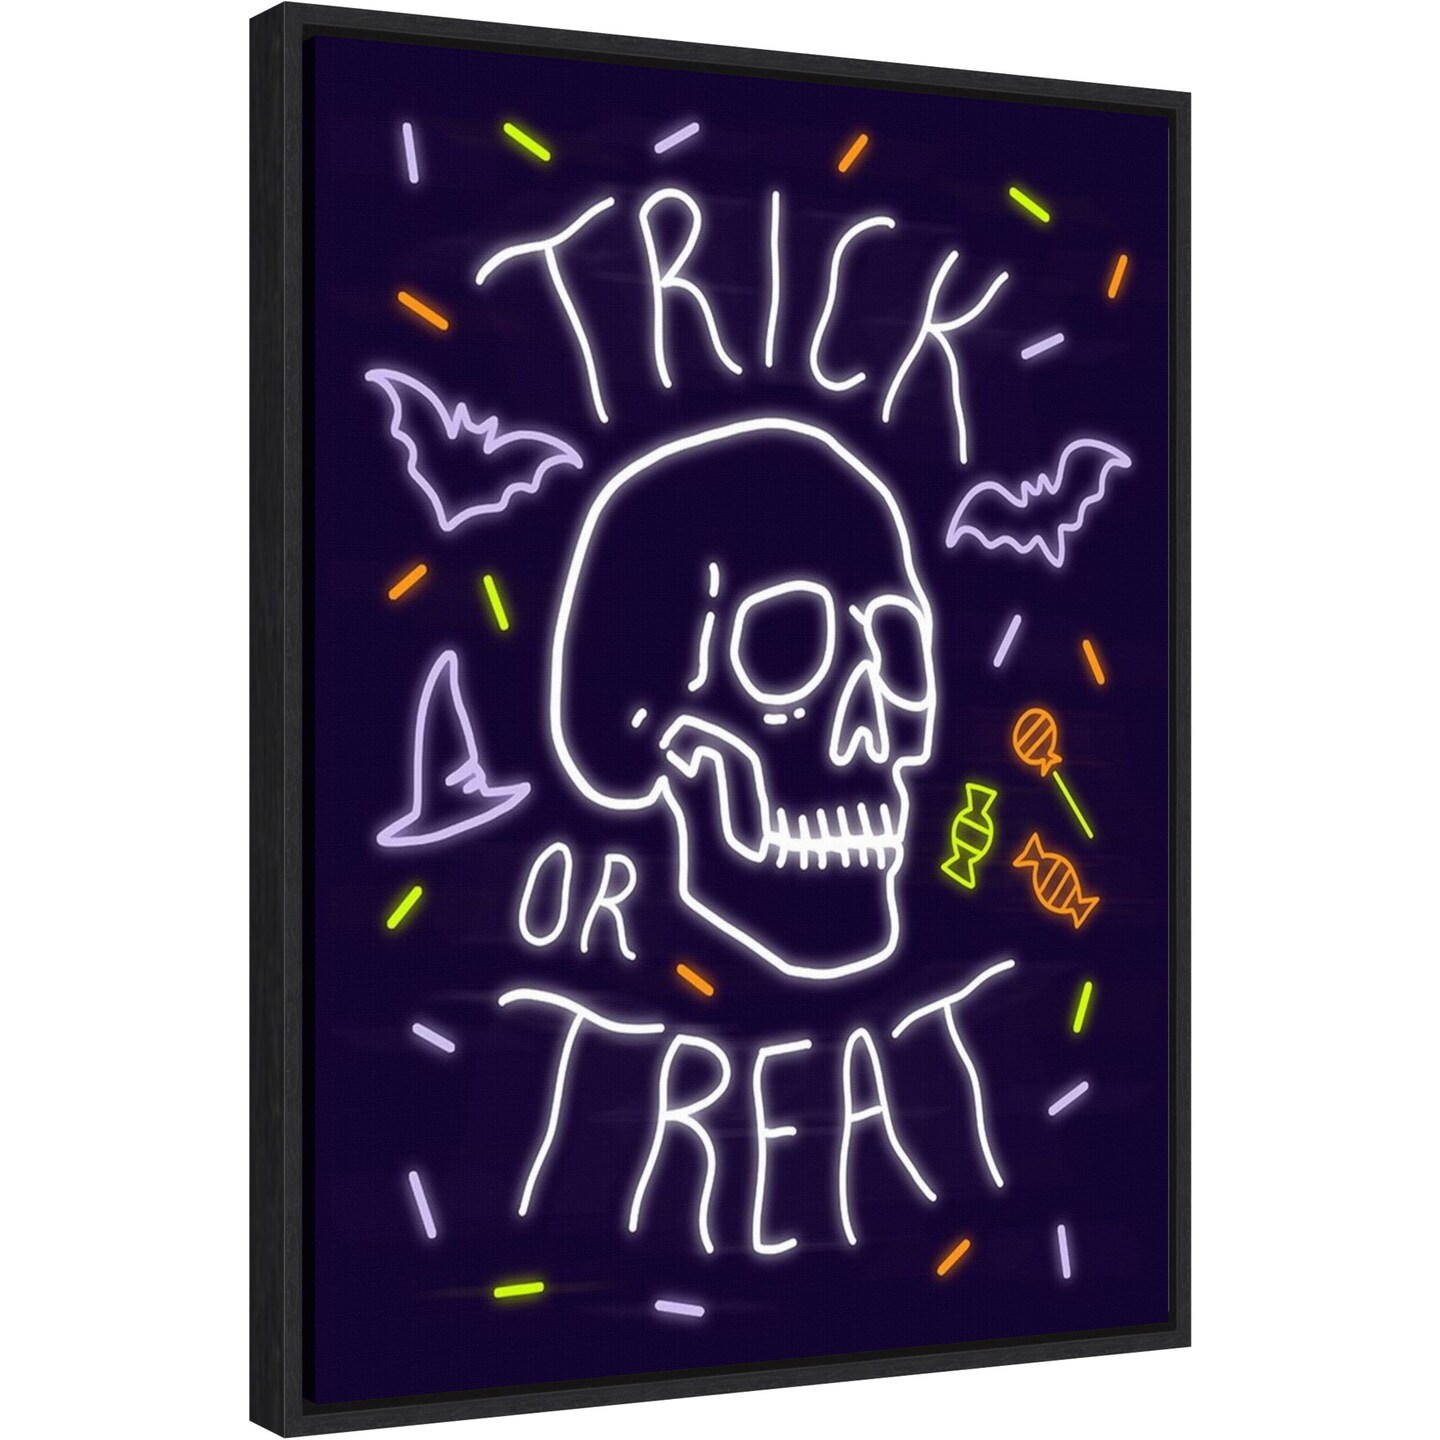 Neon Halloween I by Victoria Barnes 18-in. W x 24-in. H. Canvas Wall Art Print Framed in Black